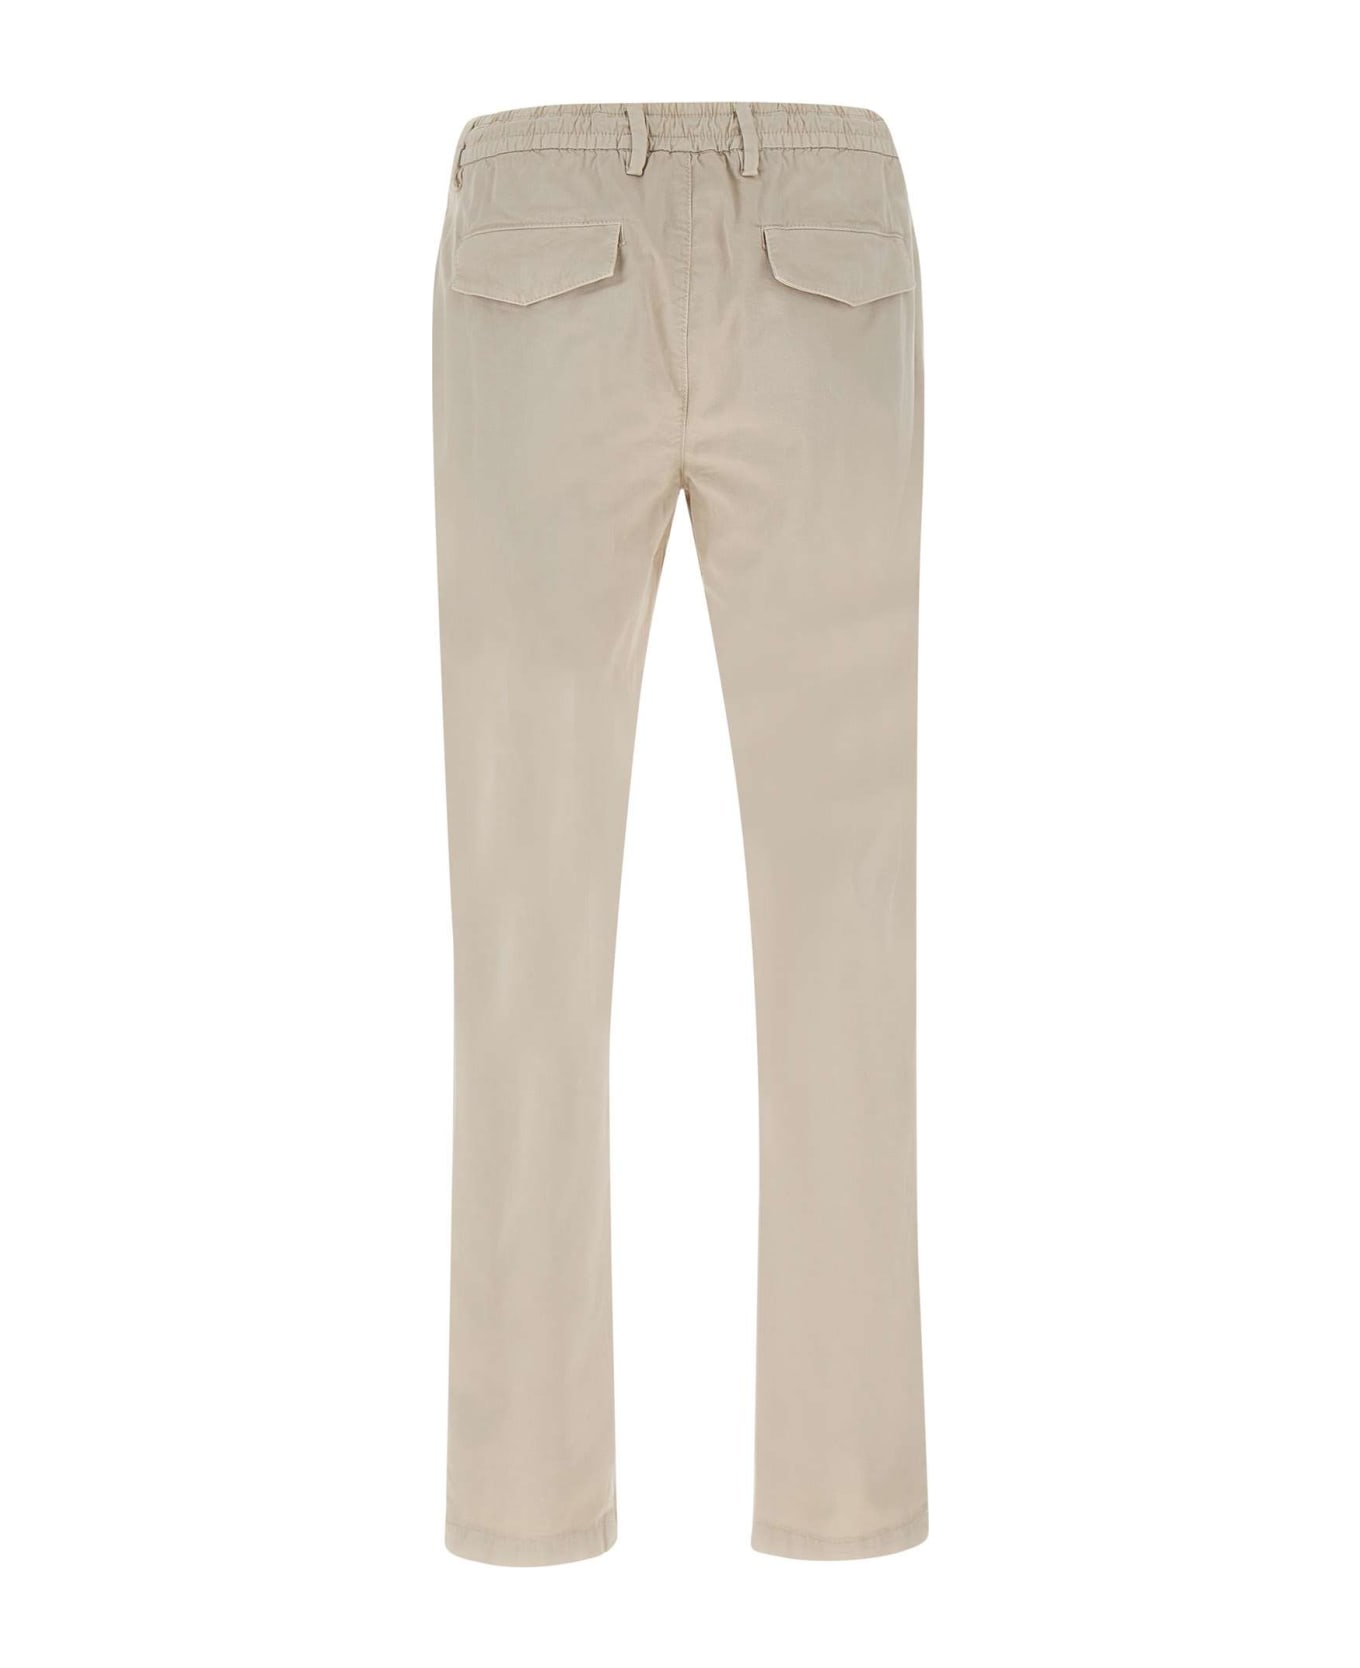 Eleventy Stretch Cotton Trousers - BEIGE ボトムス